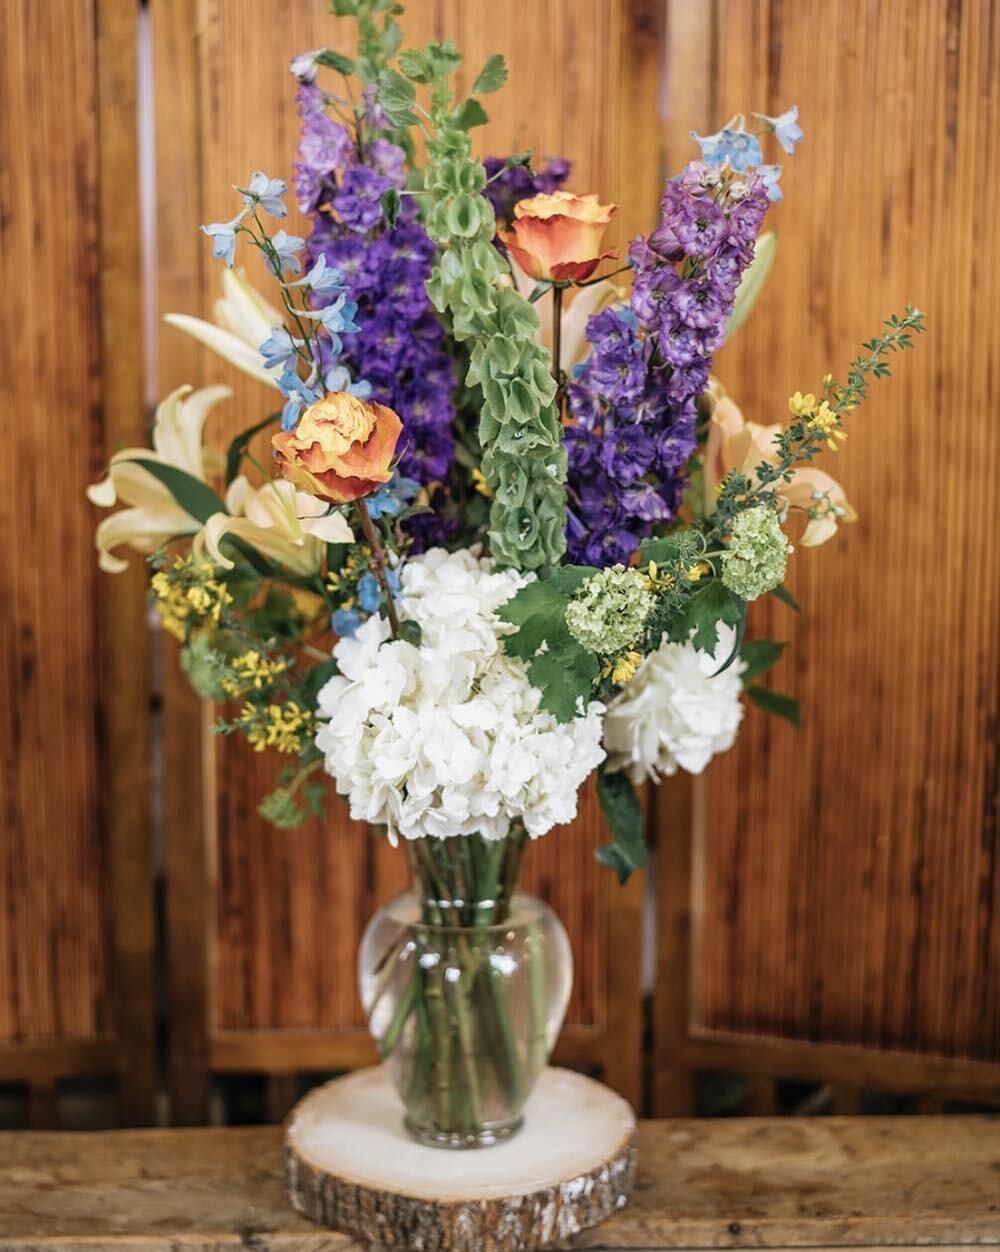 Mother&rsquo;s Day is almost a week away. Buy her something special this year and give us a call to order custom Mother&rsquo;s Day flowers. 

📸 @exploreyourstory
.
.
.
.
.
.
.
#summitcounty
#summitcountywedding
#weddingsflowers
#exploresummit
#brec